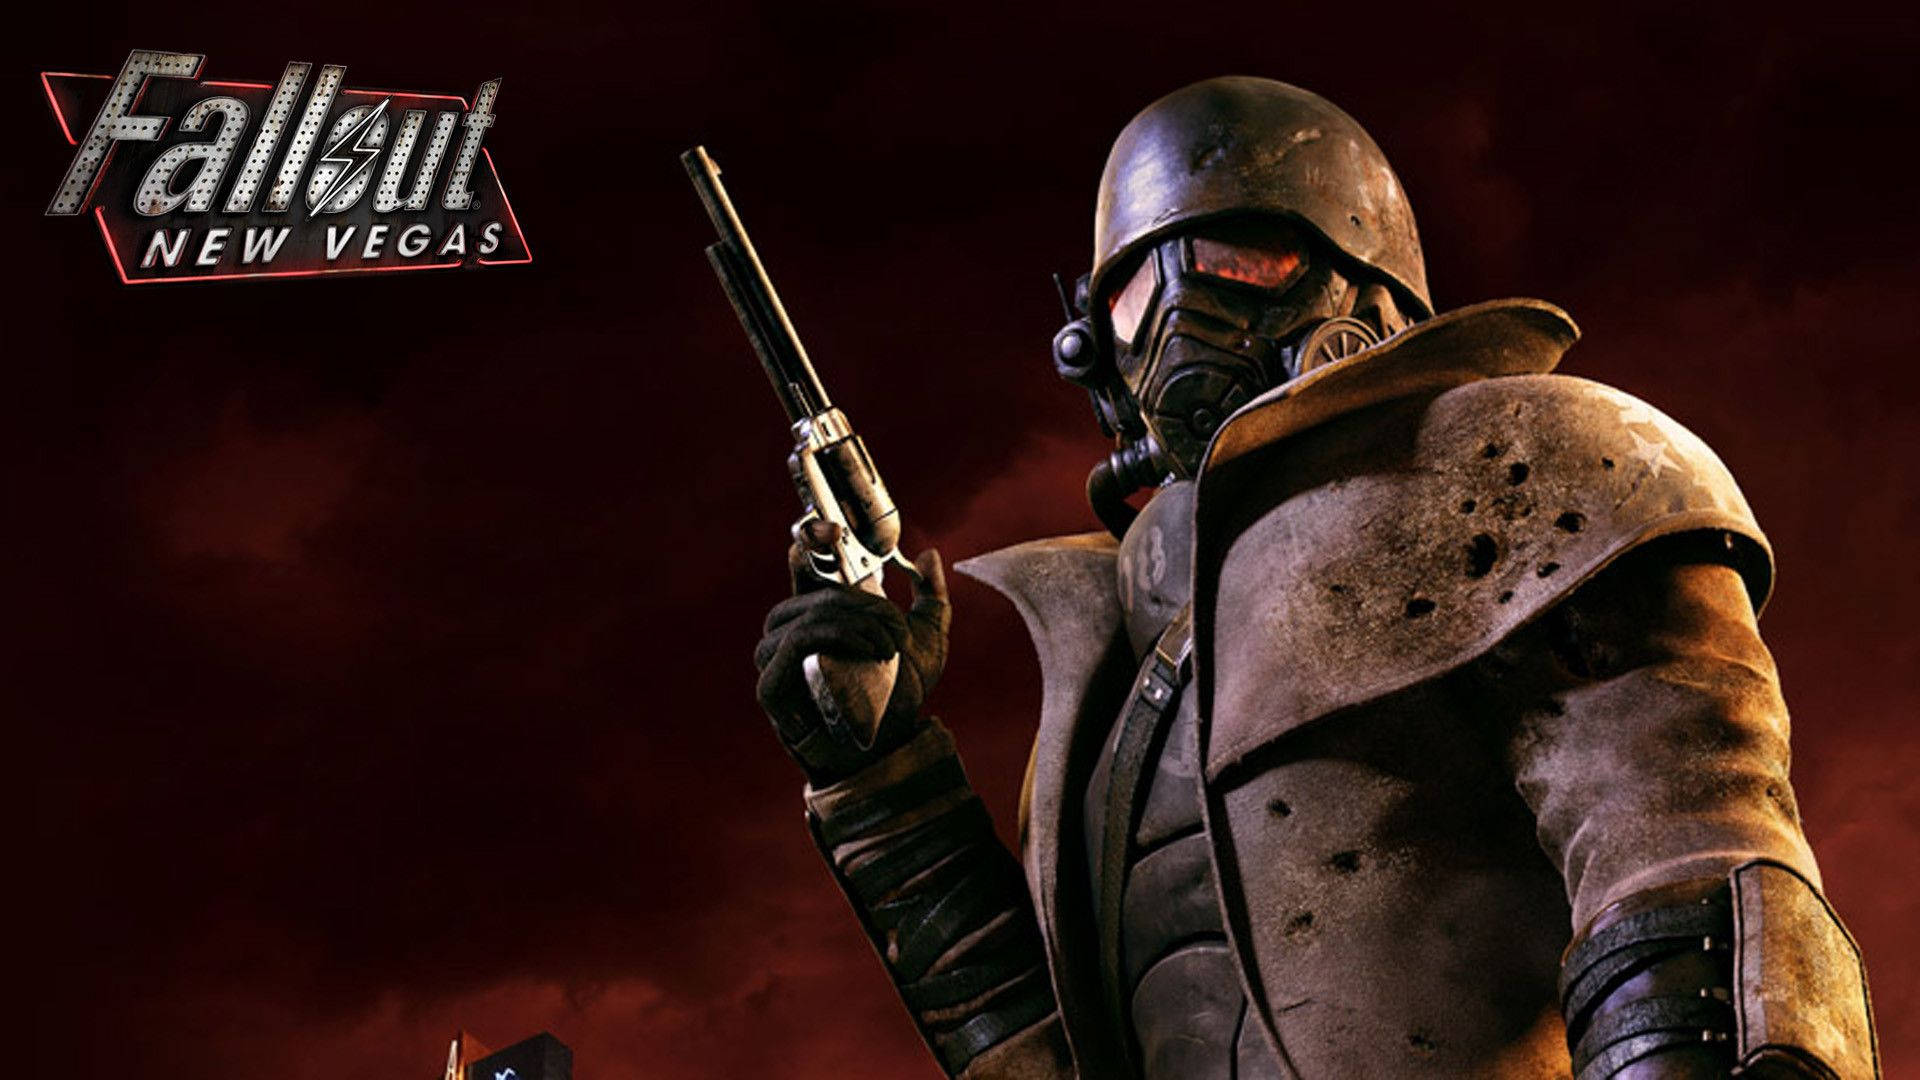 Explore the wastes of New Vegas in style as Courier Six Wallpaper